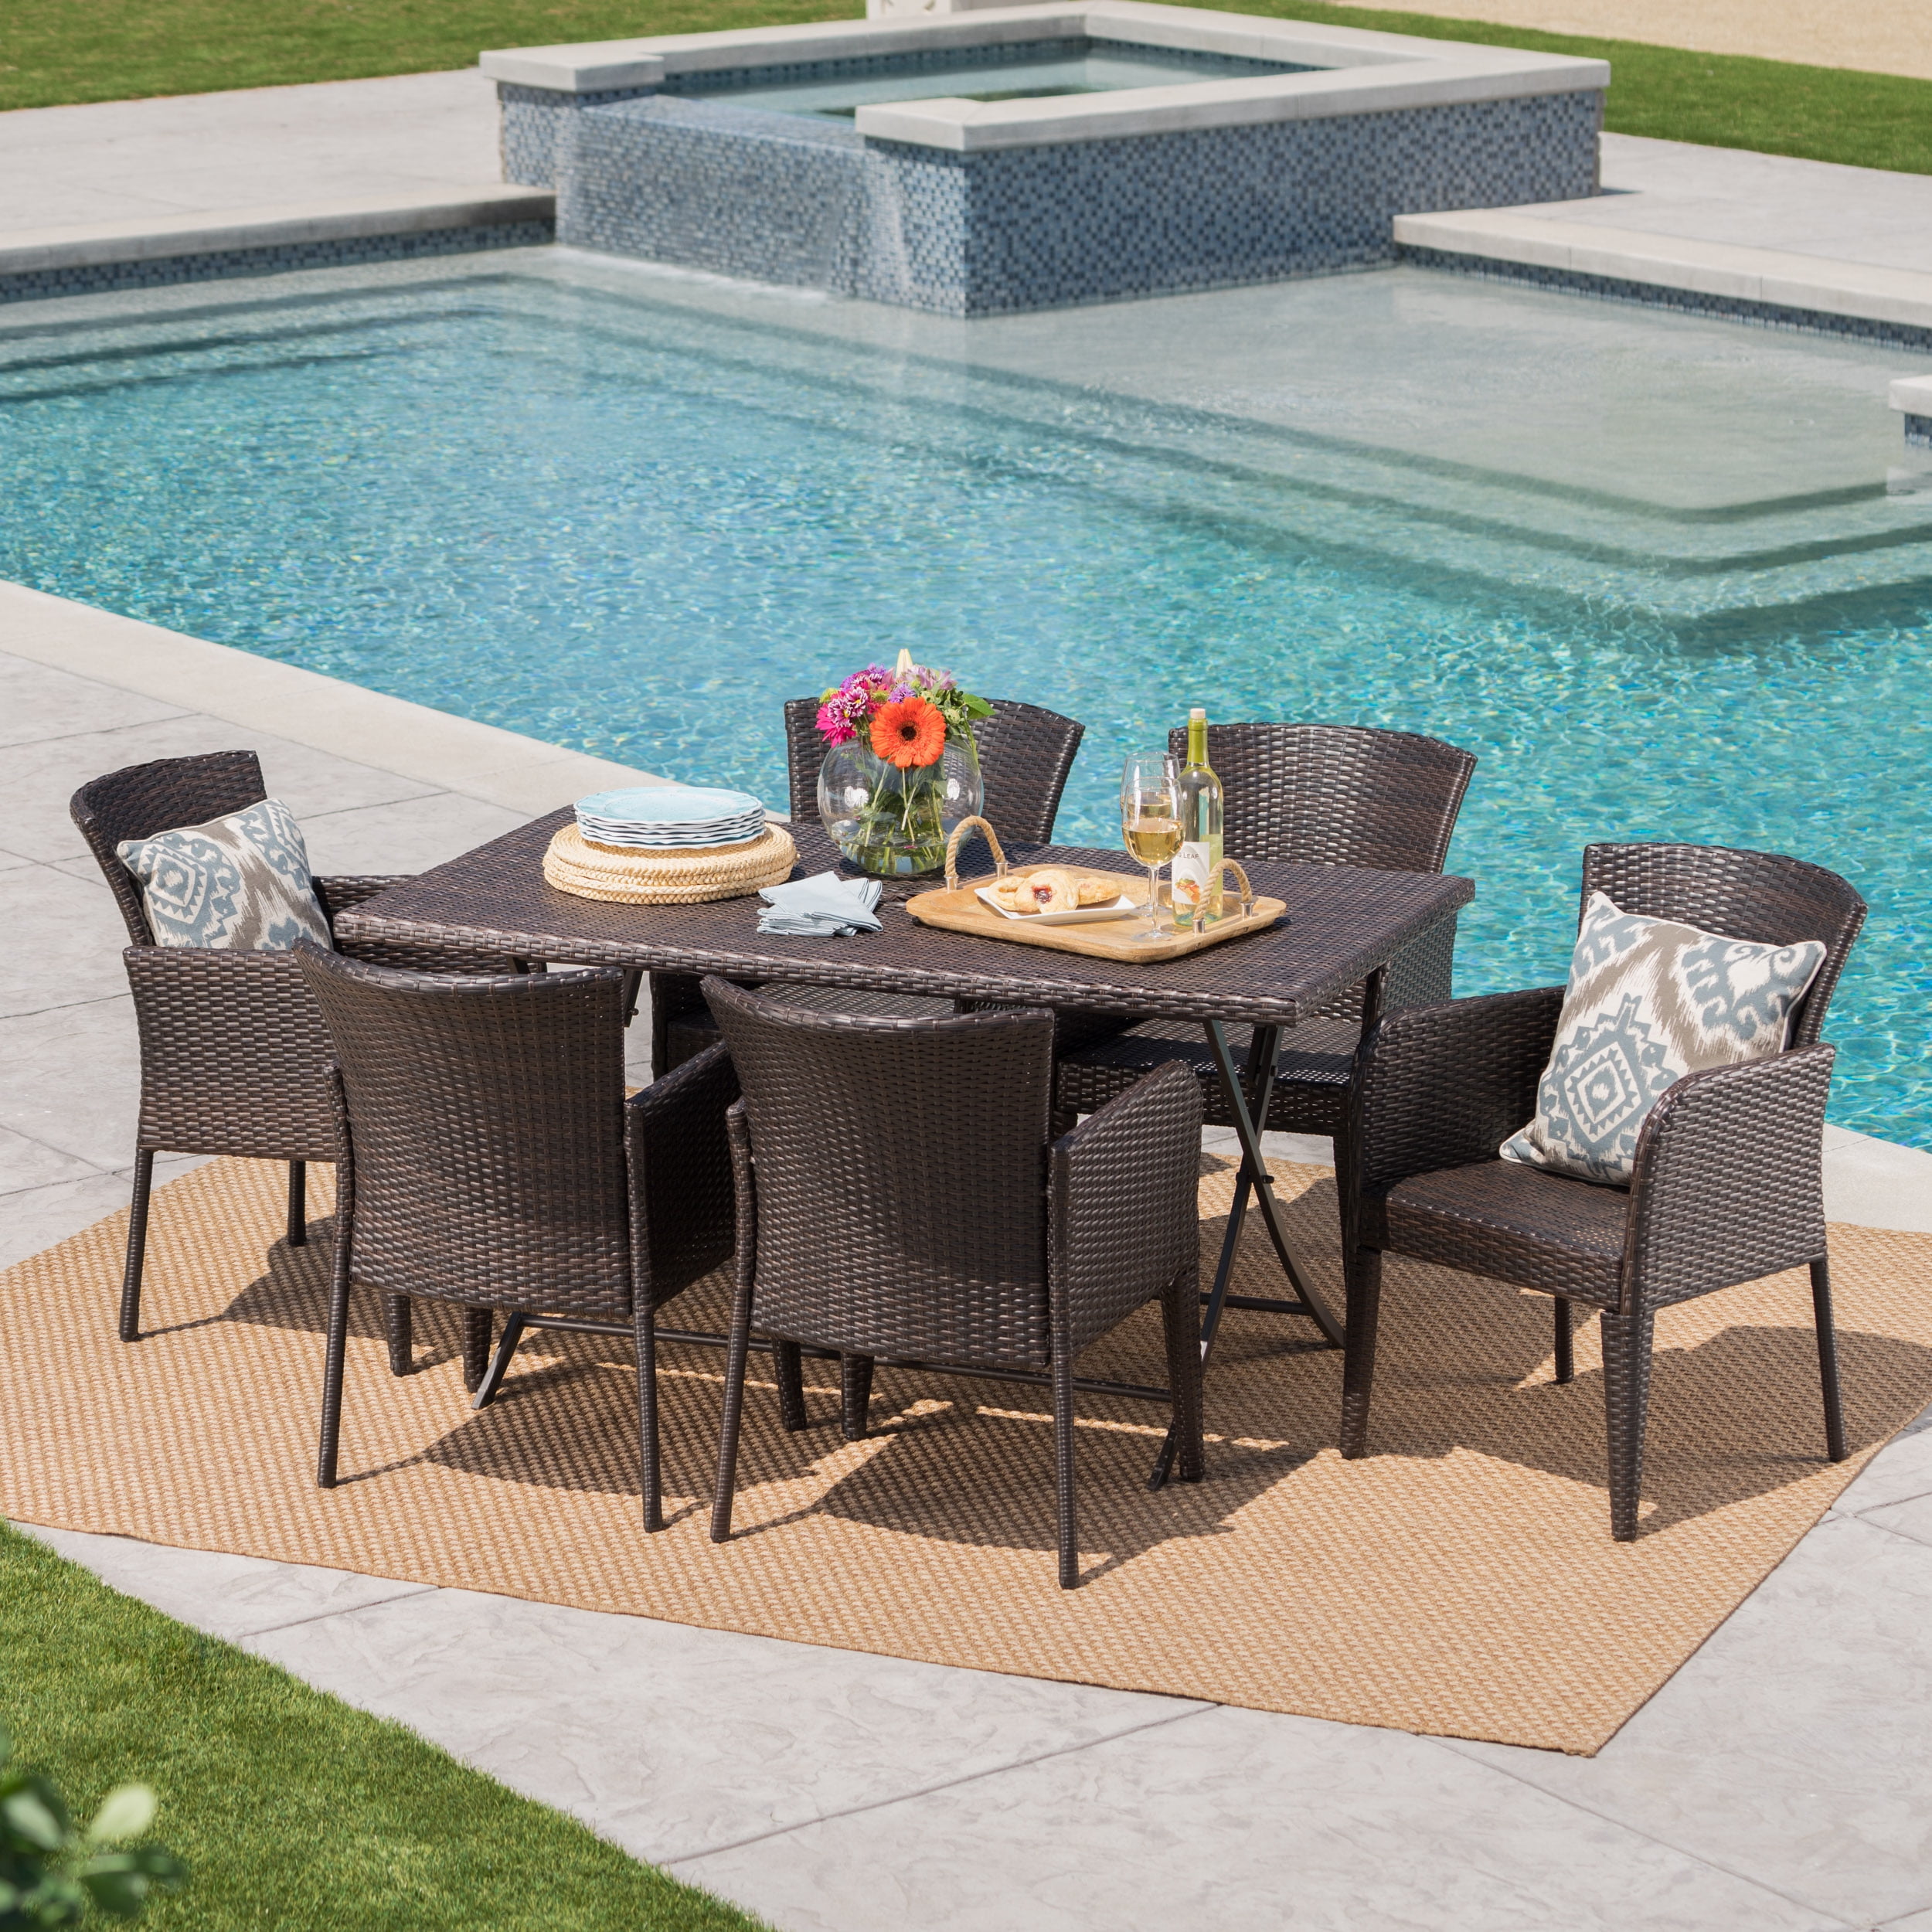 Outdoor 7 Piece Wicker Dining Set with Foldable Table,Multibrown